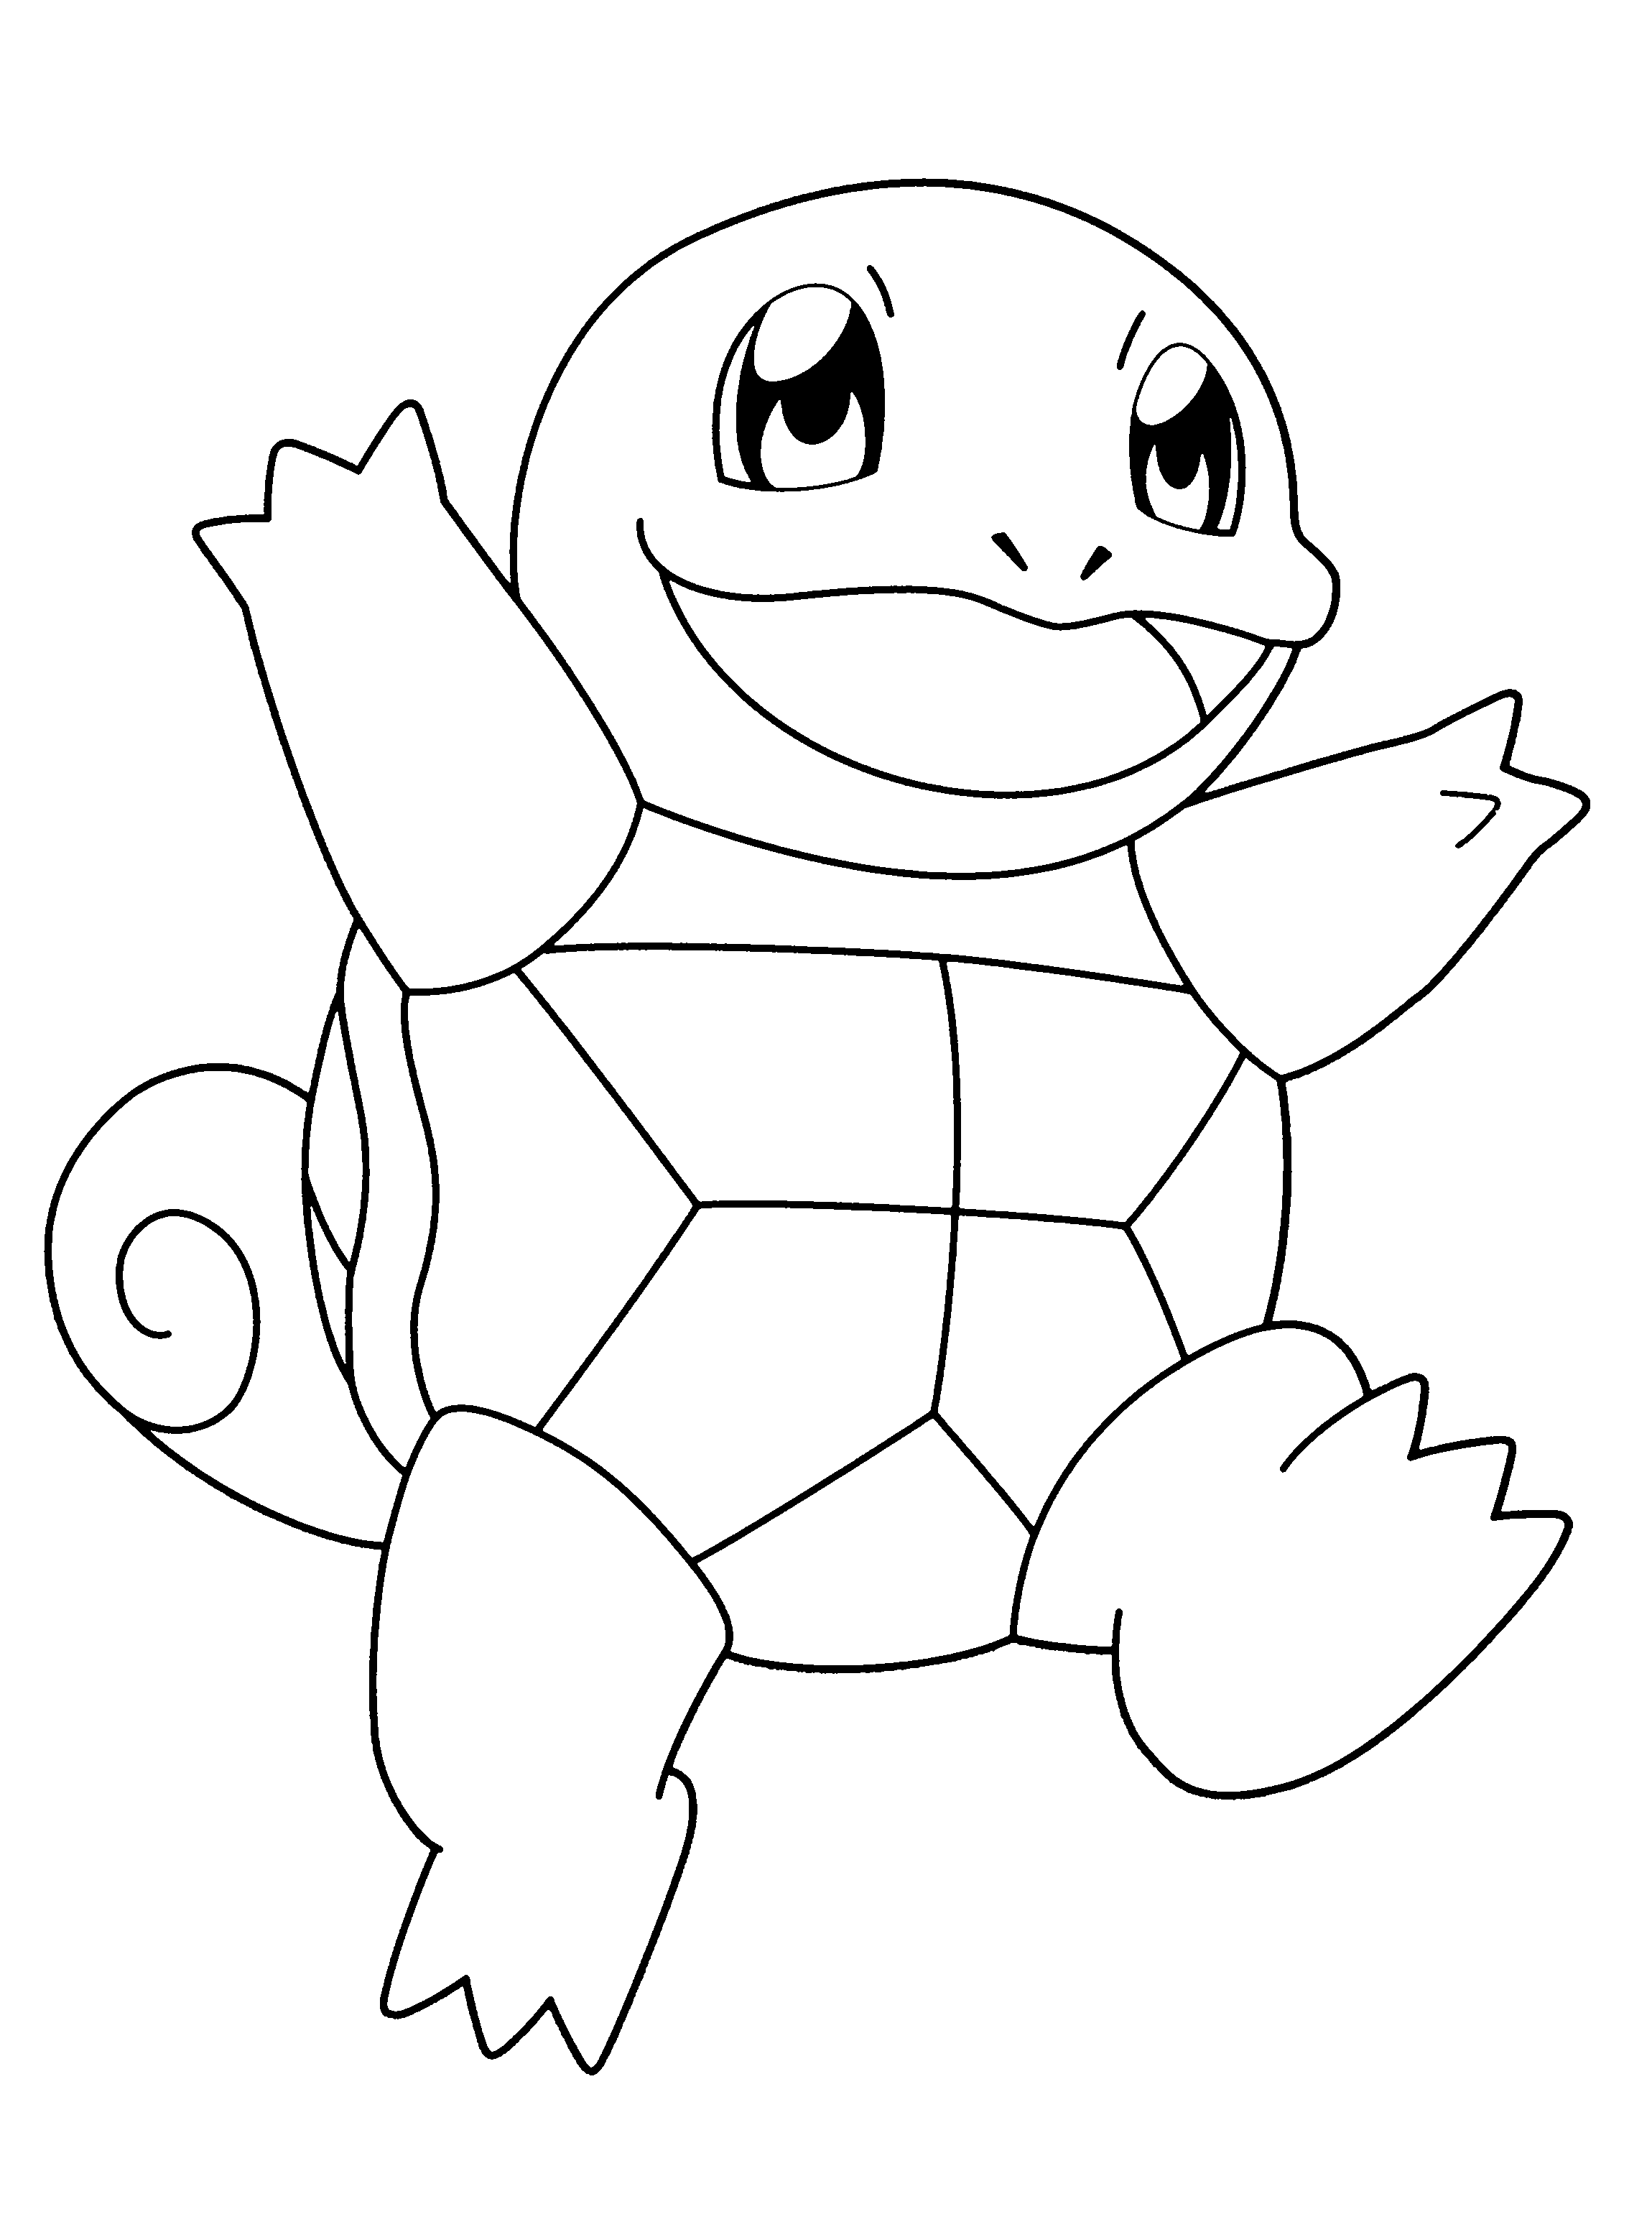 pokemon colouring pages online free 8 best pokemon images on pinterest free printable online colouring pages pokemon free 